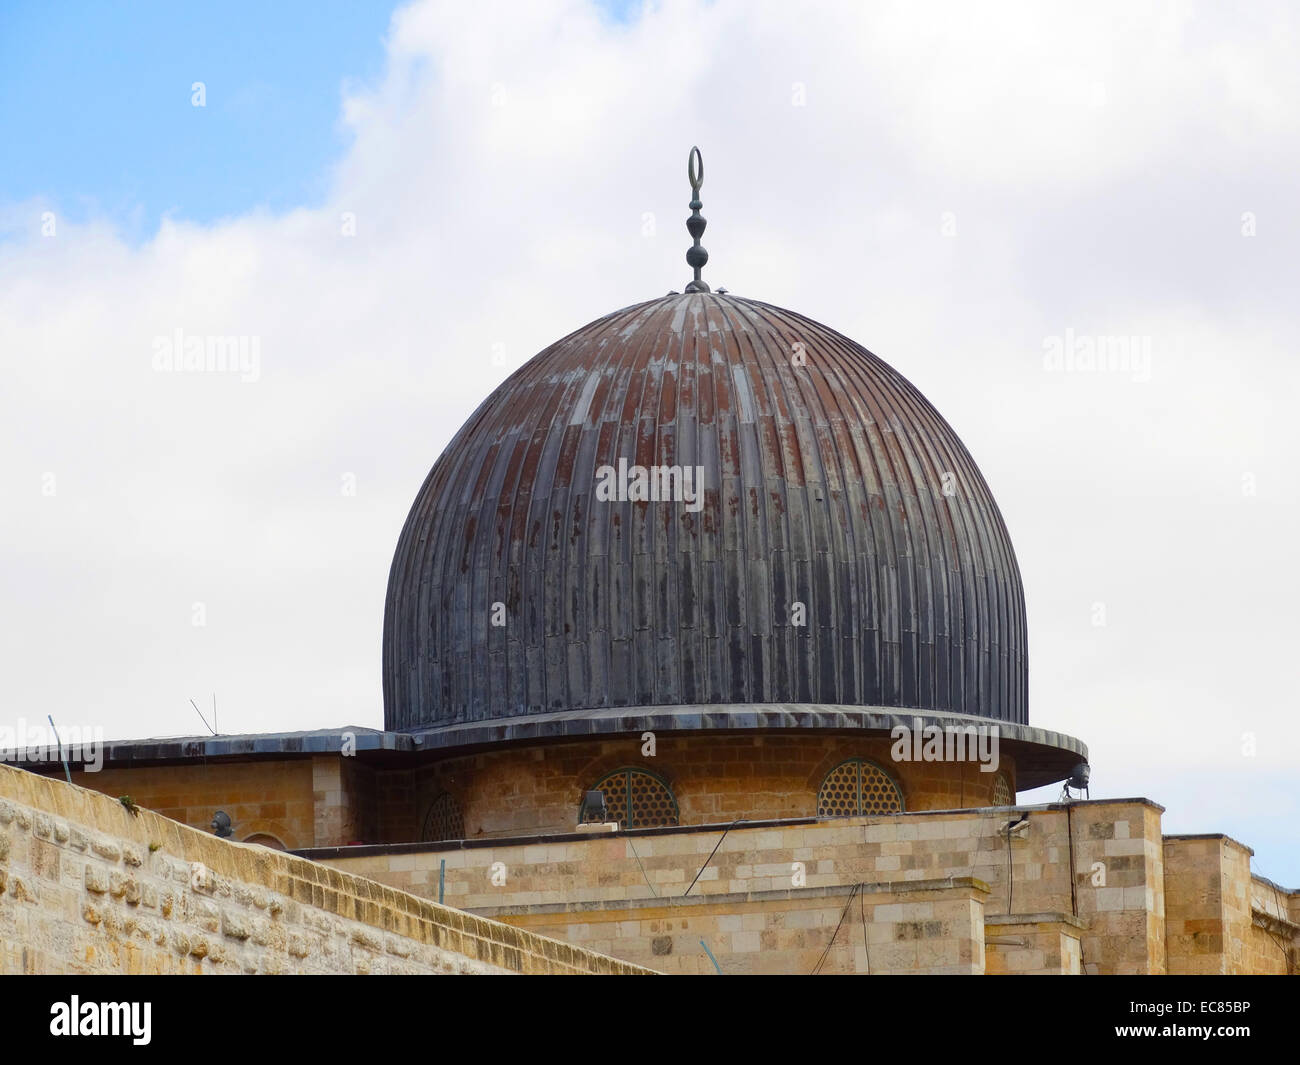 The Al-Aqsa Mosque; the third holiest site in Islam; located in the Old City of Jerusalem. Stock Photo